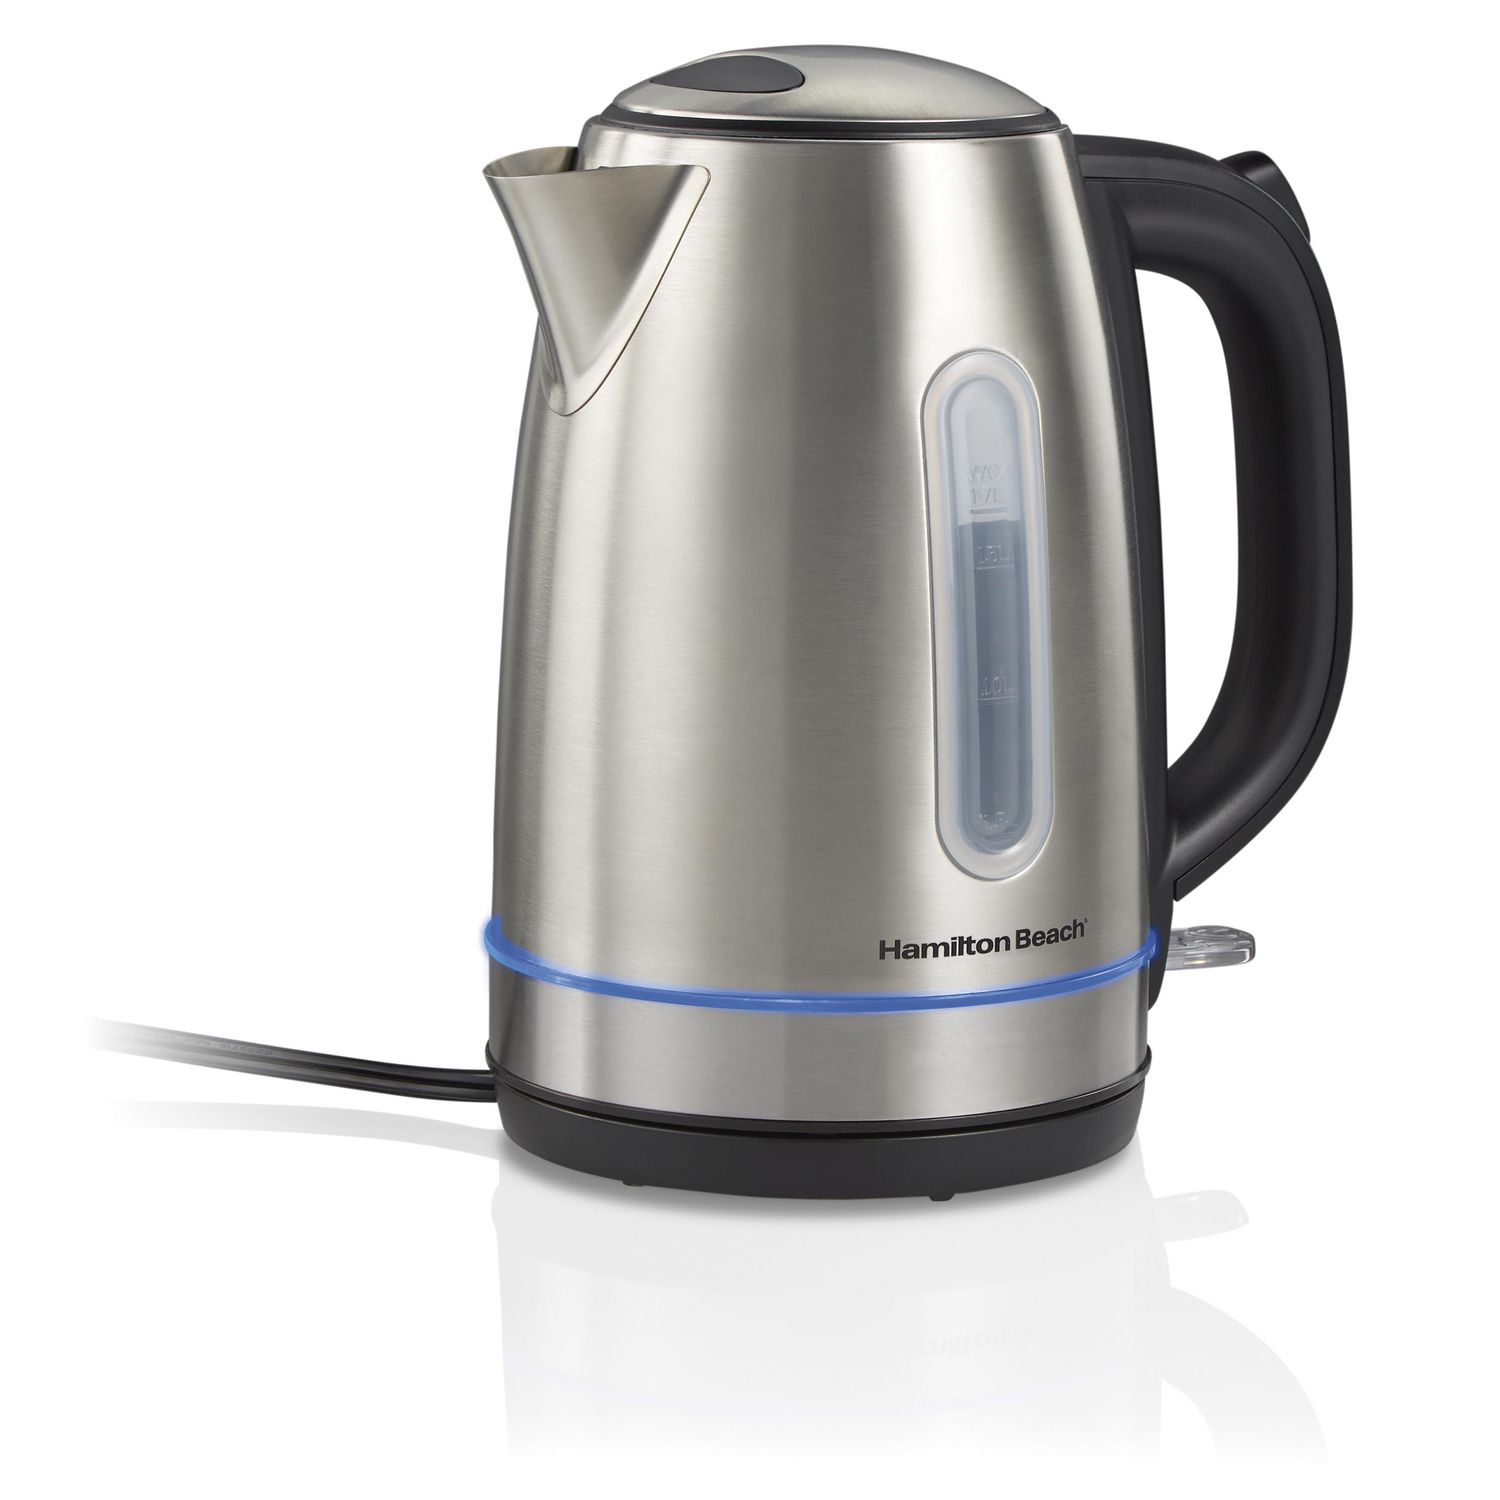 Hamilton Beach 1.7 L Stainless Steel Electric Kettle with LED Light Ring -  Macy's